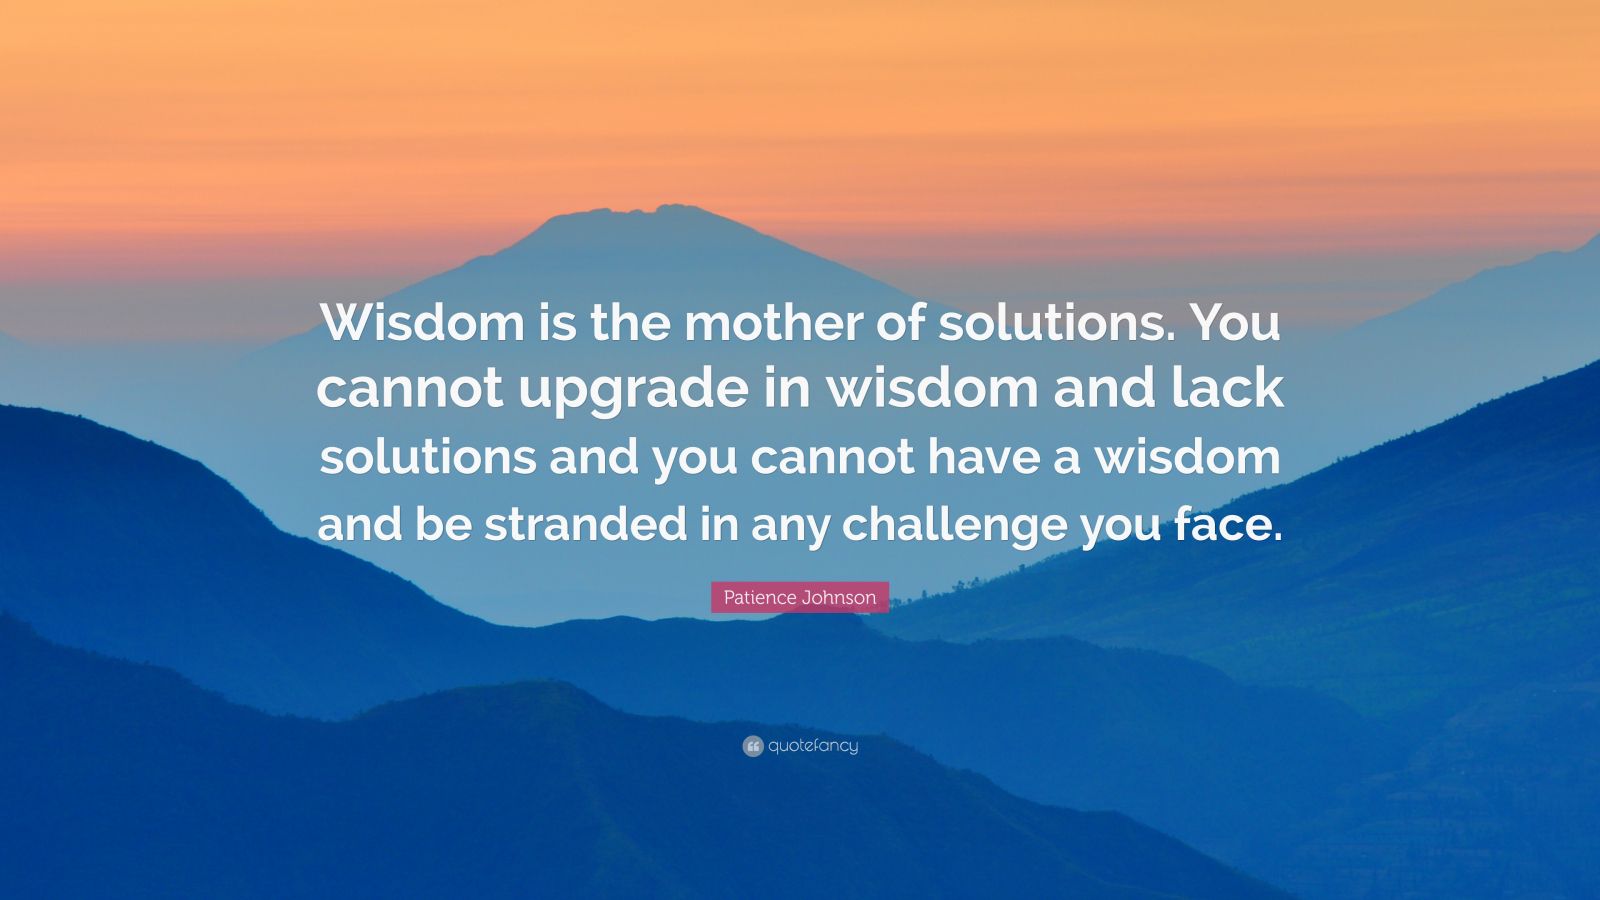 Patience Johnson Quote: “Wisdom is the mother of solutions. You cannot ...